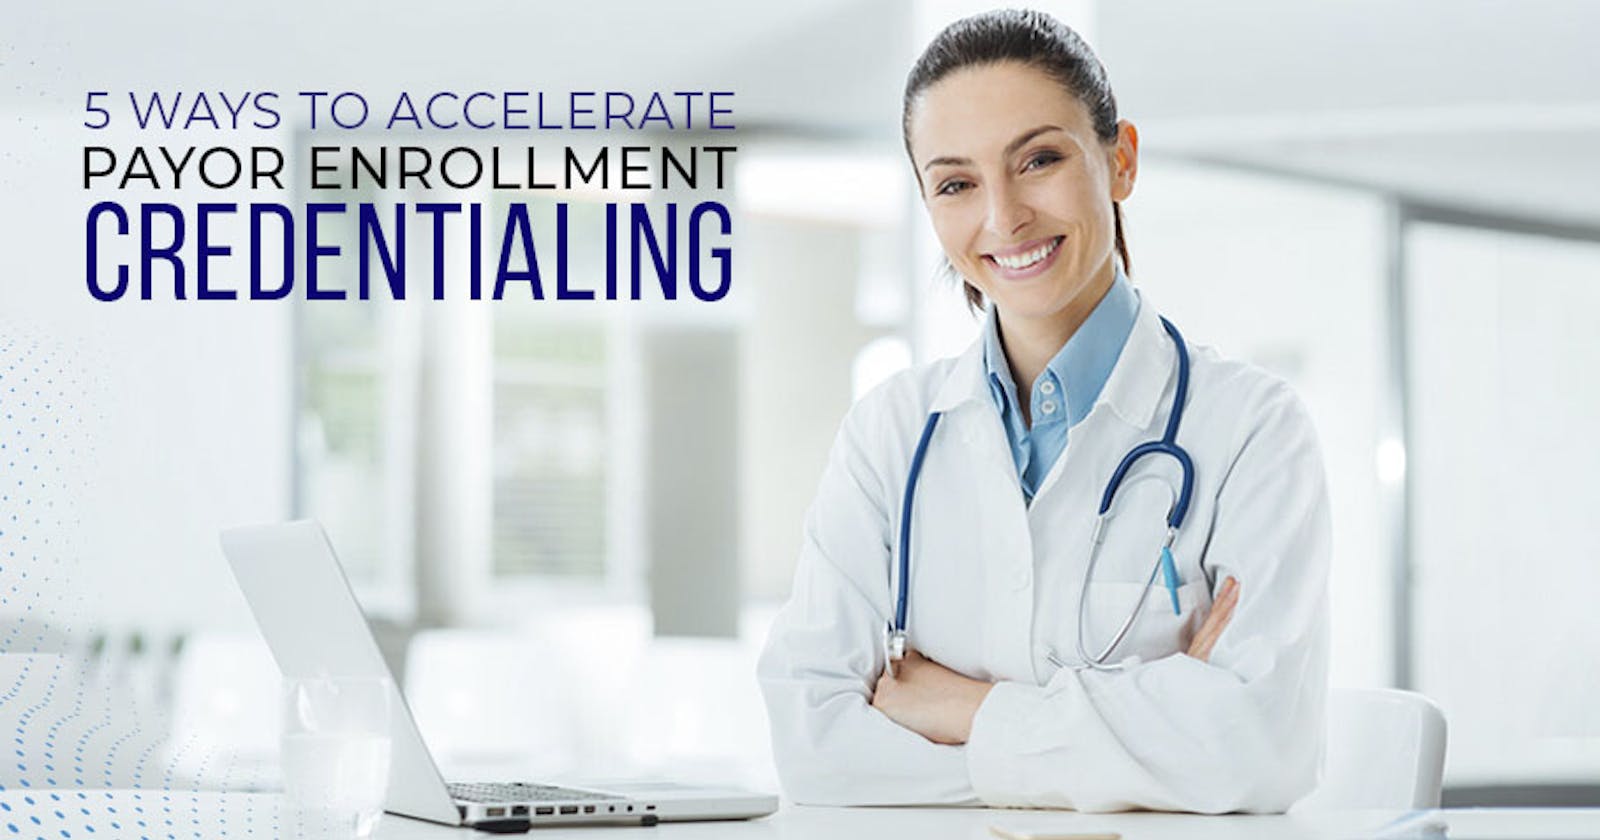 Payor Credentialing Services